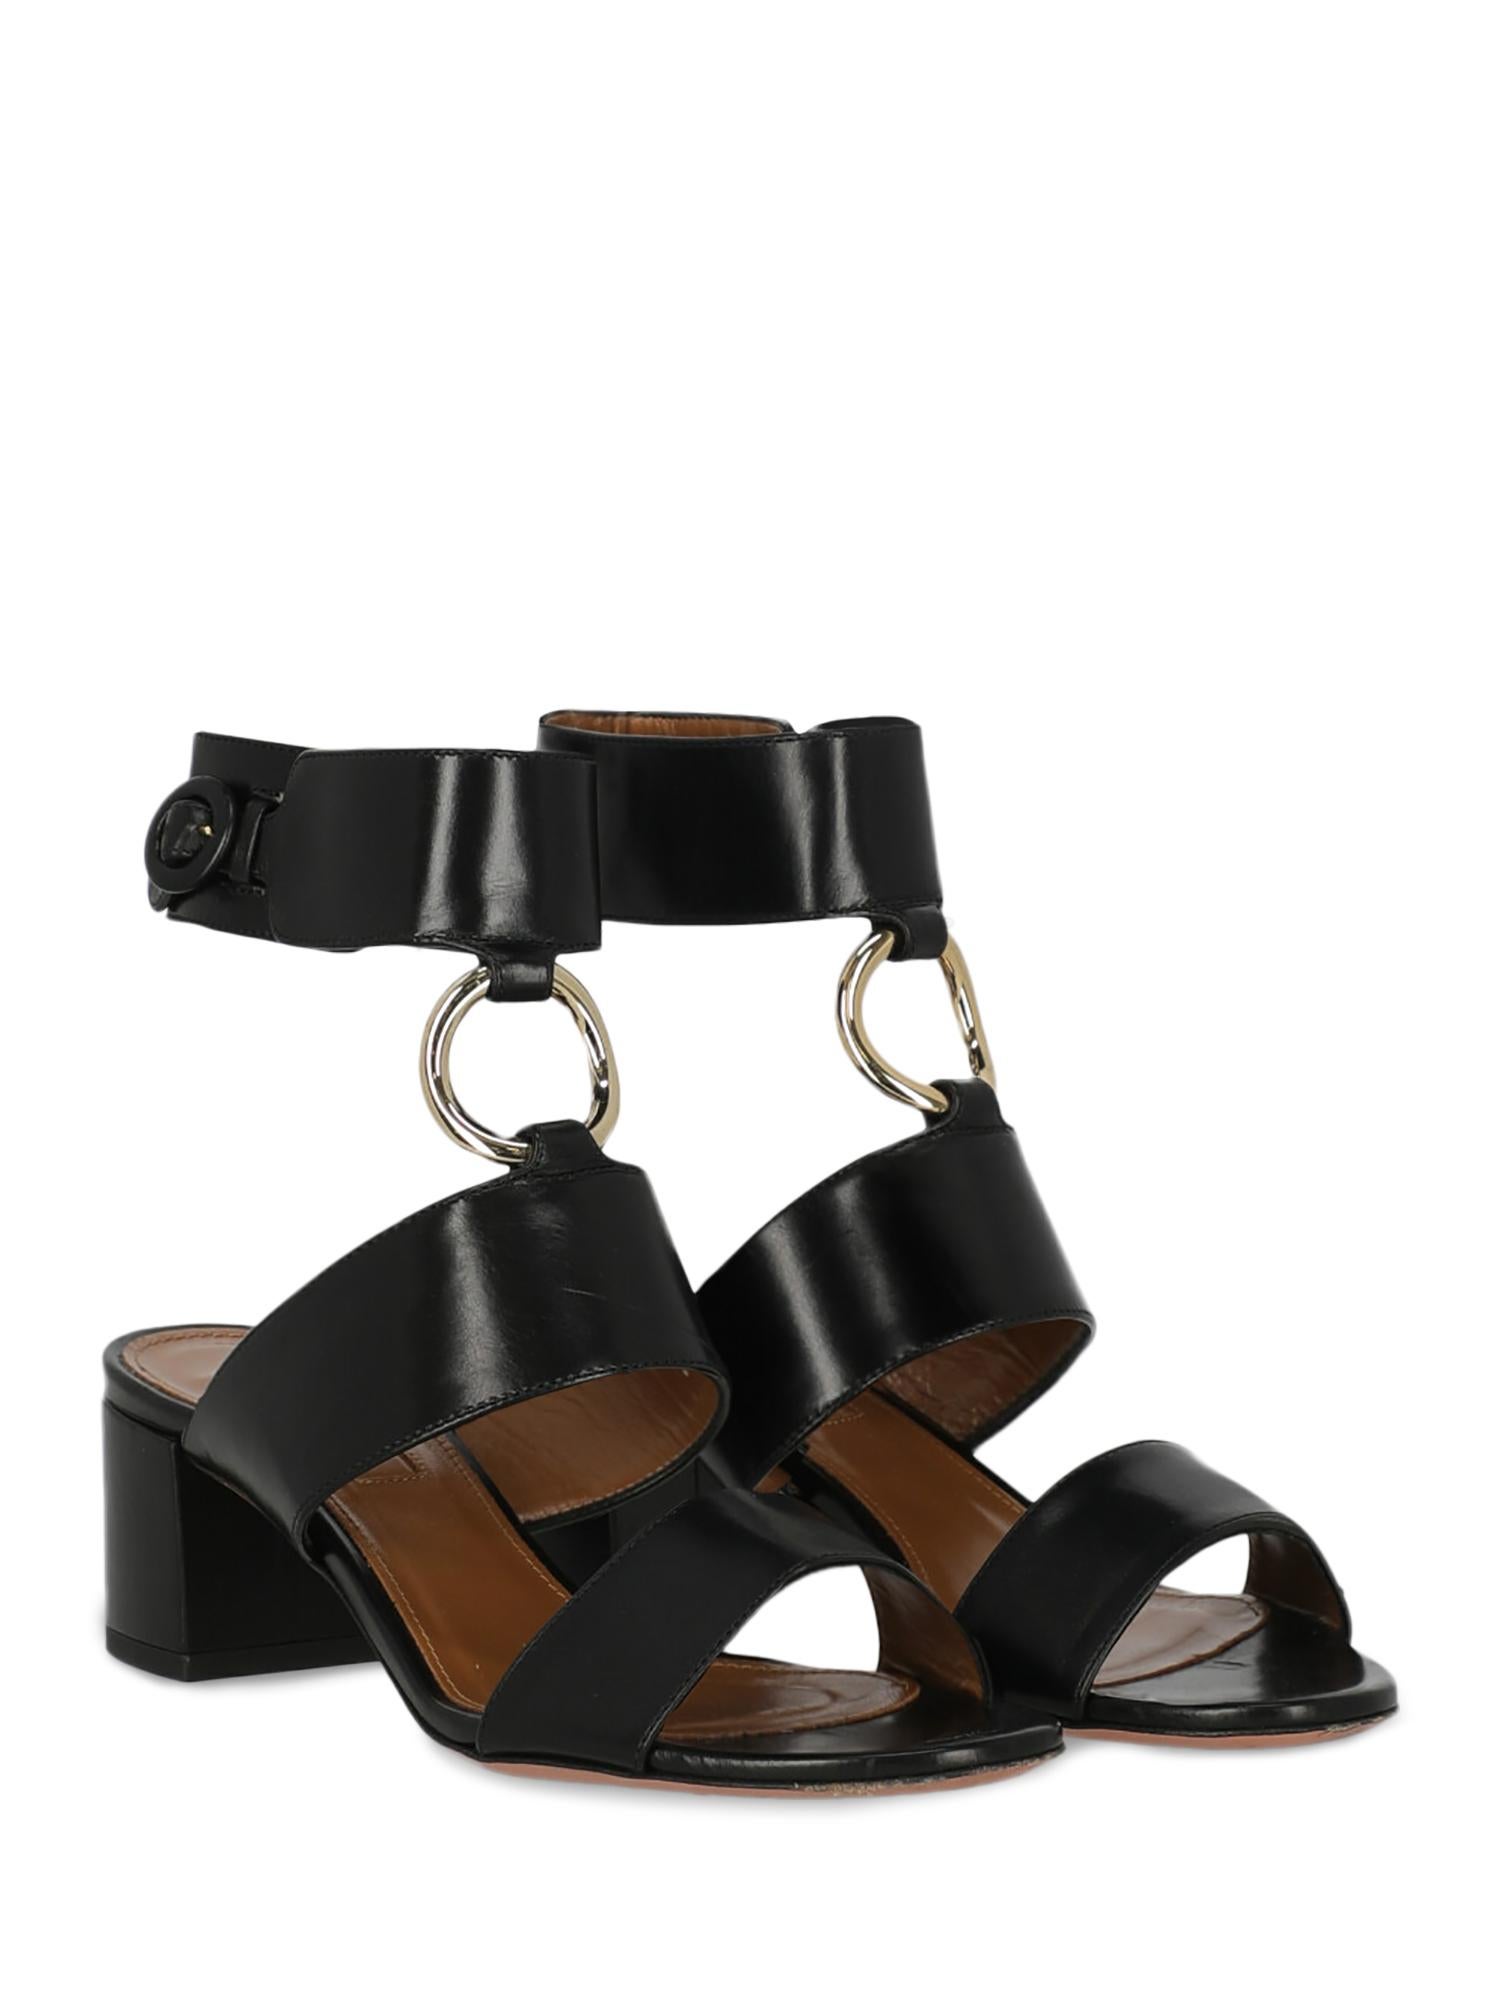 Product Description: Sandals, leather, solid color, buckle fastening, gold-tone hardware, open toe, branded insole, block heel, mid heel

Includes:
- Box
- Dust bag

Product Condition: Very Good
Heel: slightly visible mark. Sole: negligible signs of